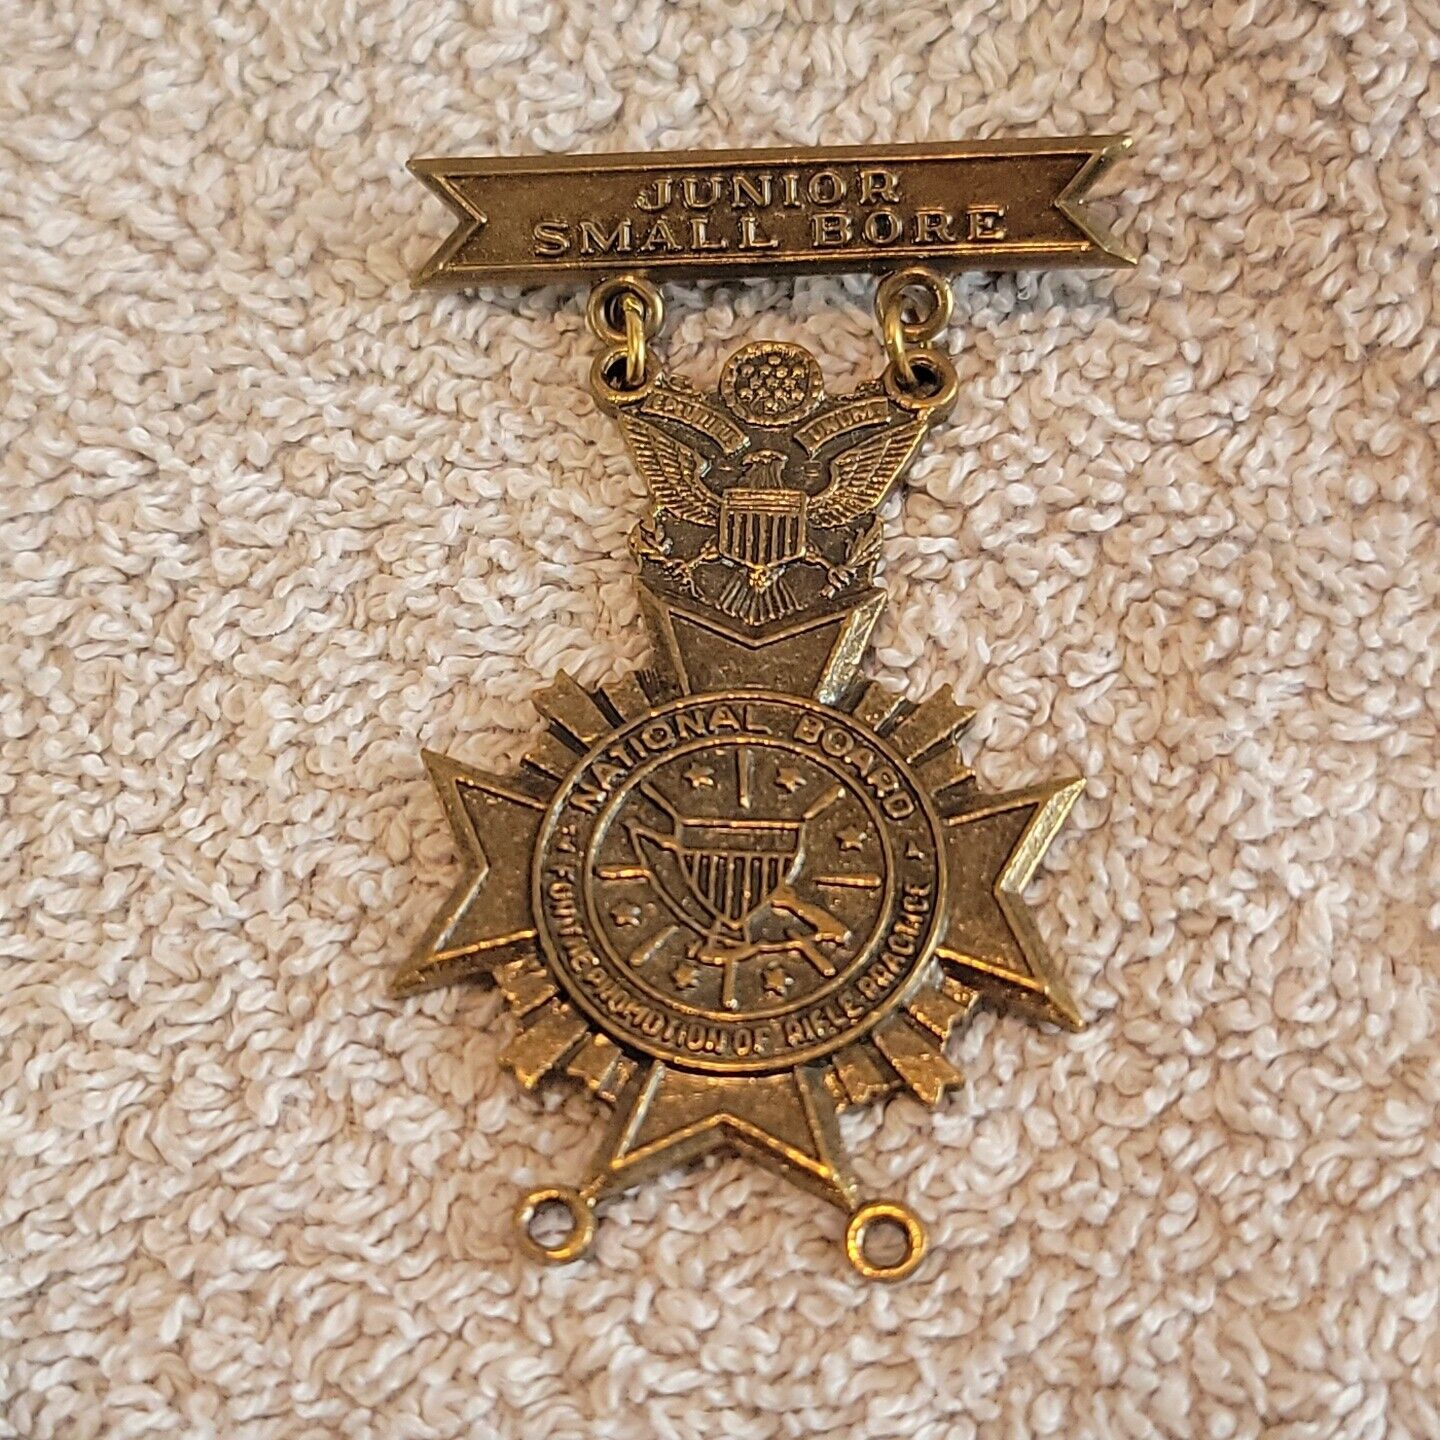 Vtg Junior Small Bore Natl. Board for the Promotion of Rifle Practice Medal Pin